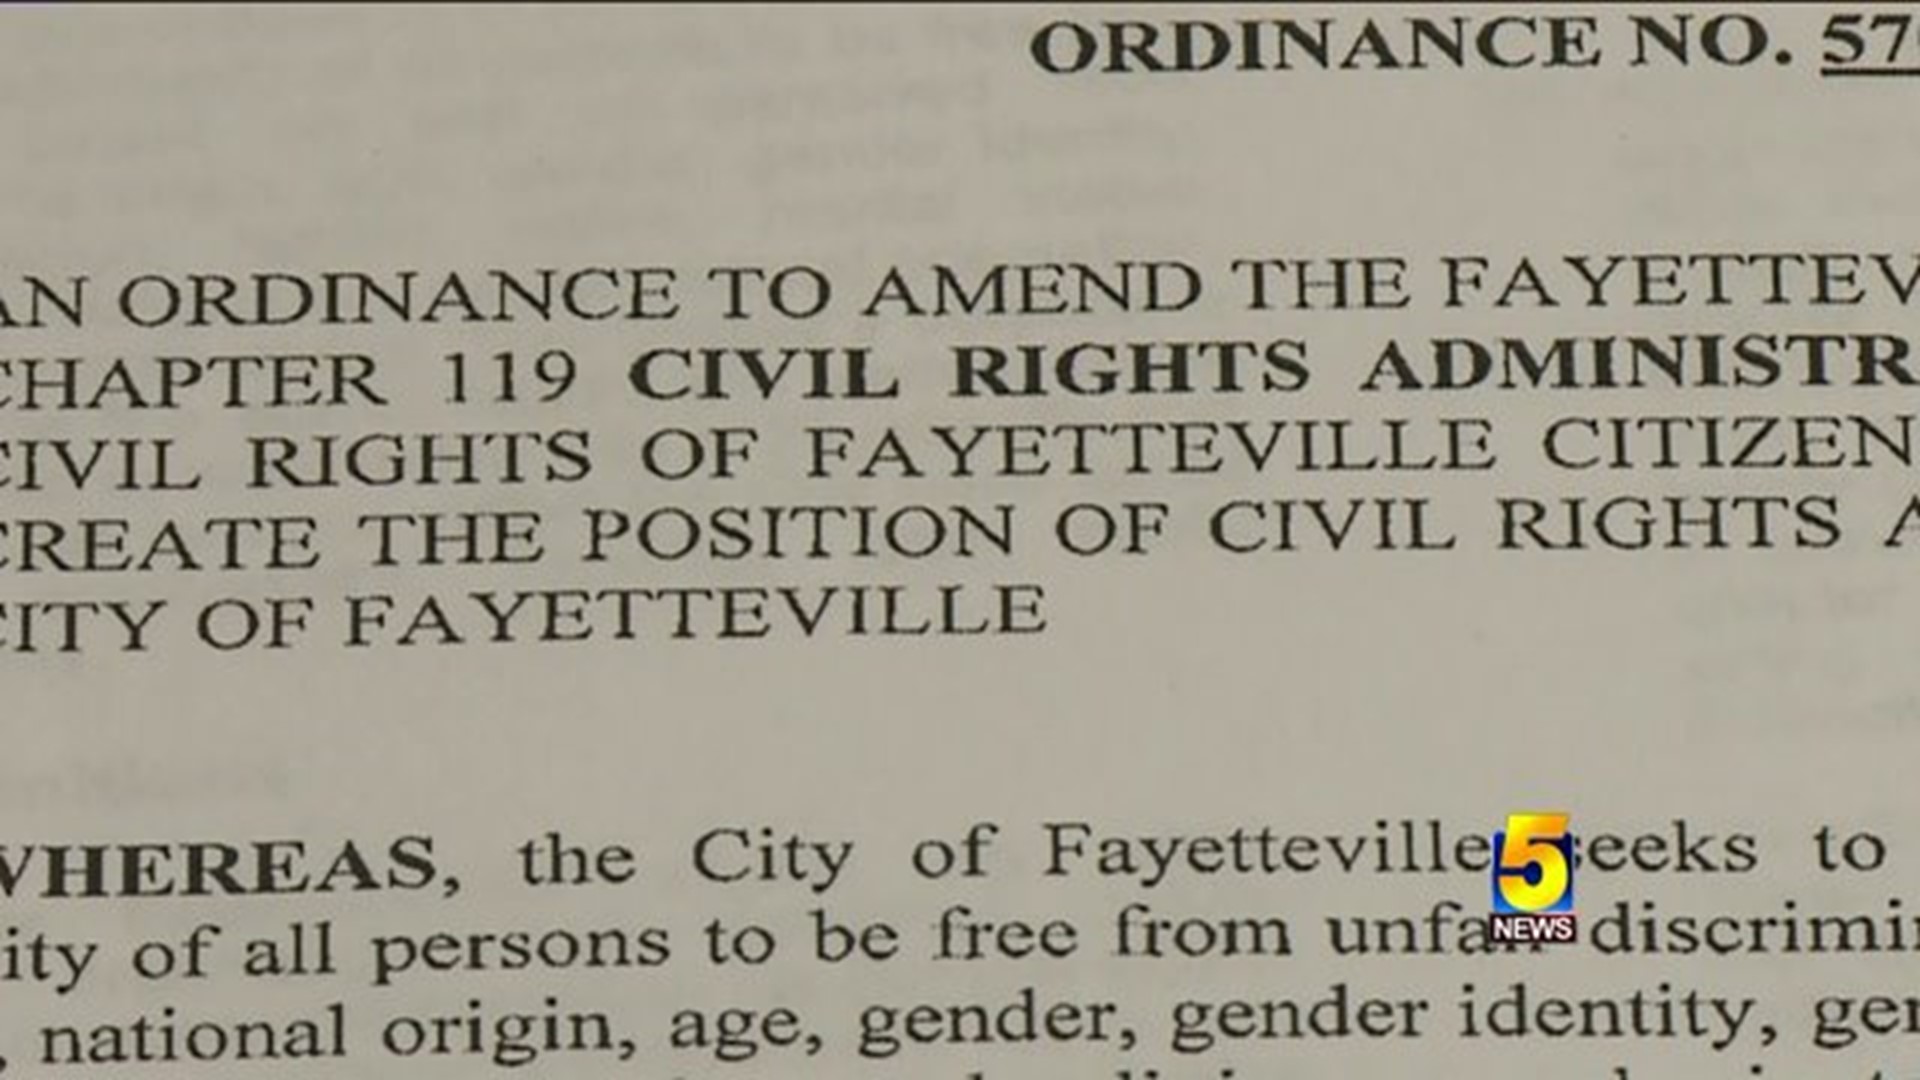 Civil Rights Ordinance Key Issue In Fayetteville City Council Runoff Election